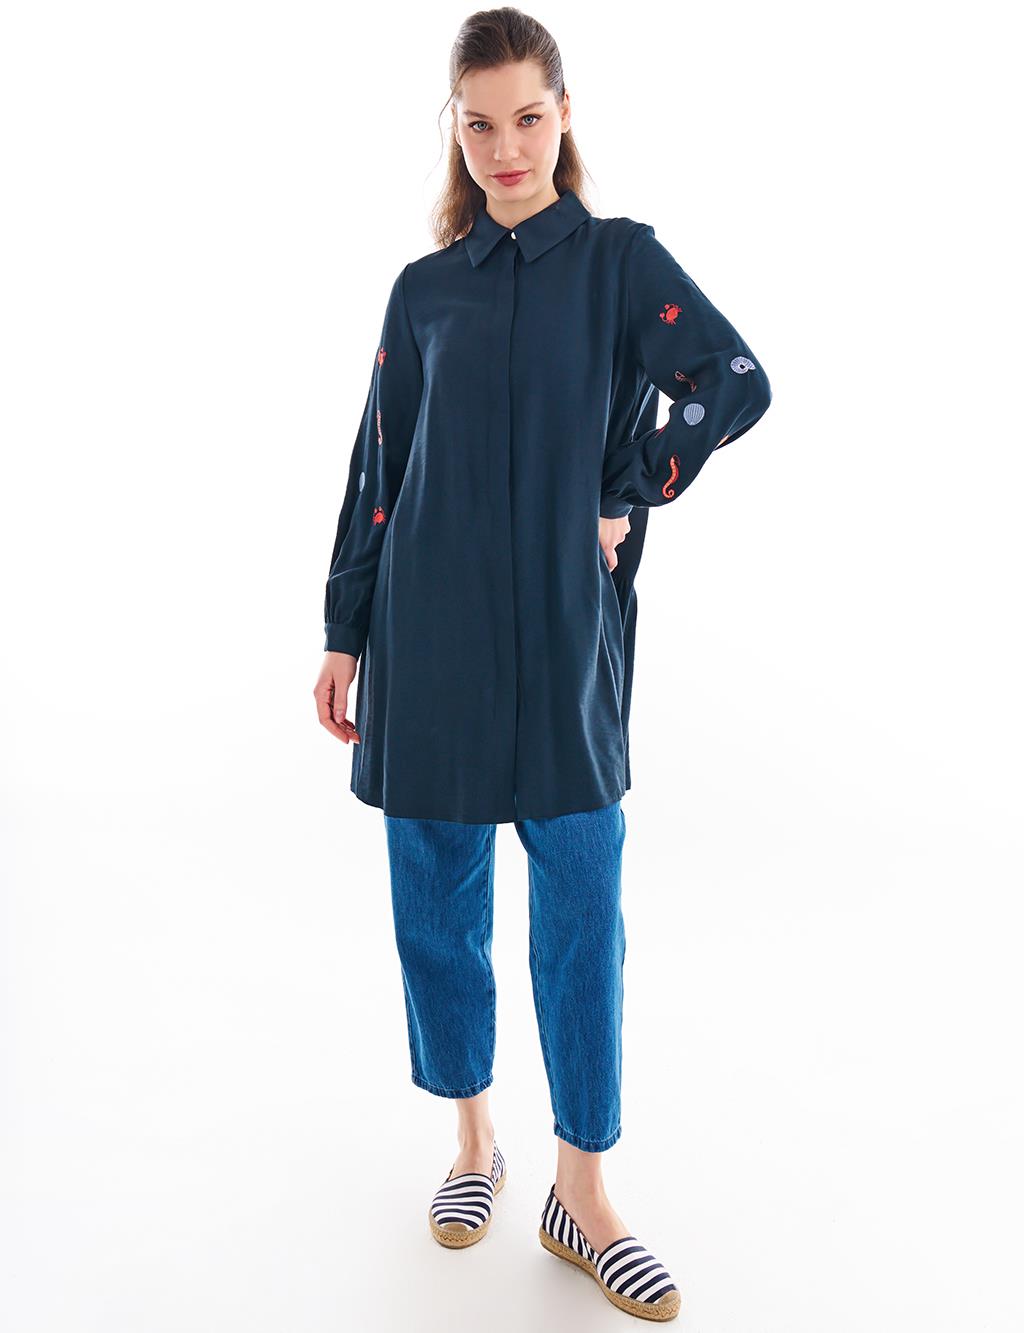 Embroidered Shirt Collar Tunic Navy Blue